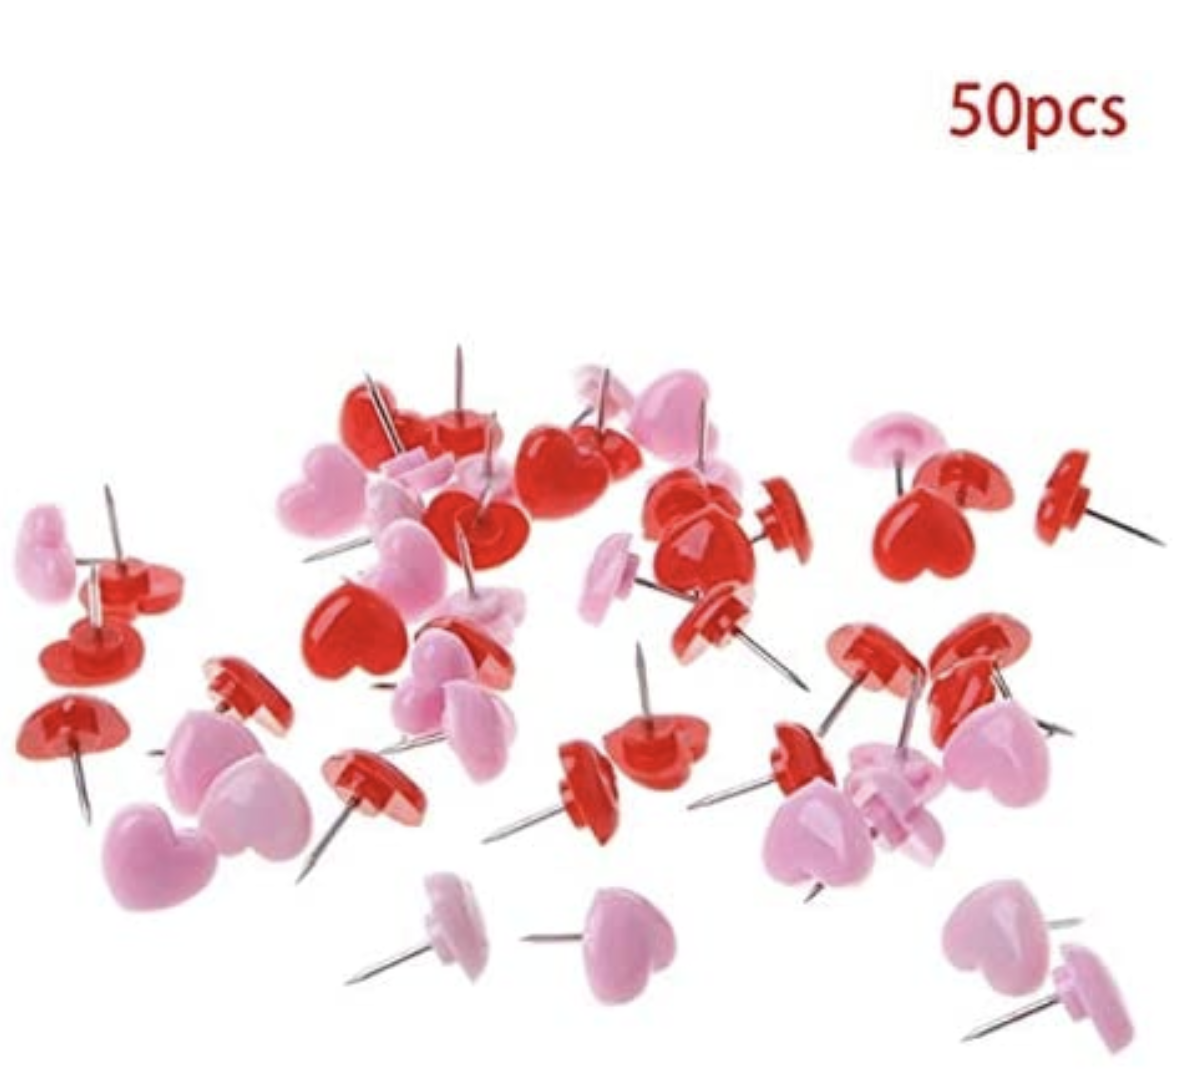 Facibom Heart Shape 50pcs Plastic Quality Cork Board Safety Colored Push Pins Thumbtack Office School Accessories Supplies Pink